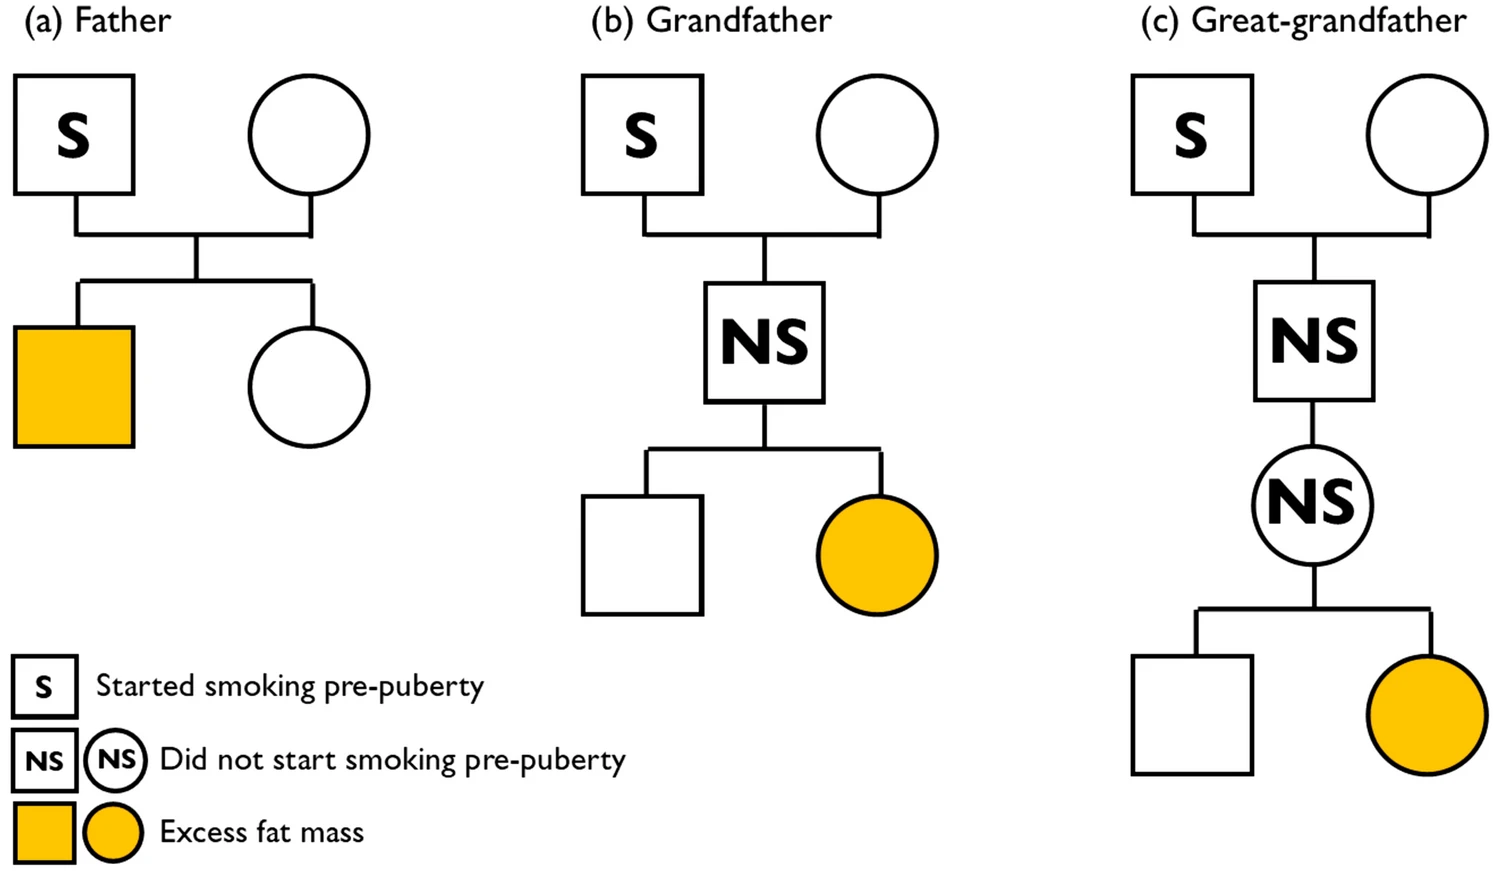 Diagram showing effects of ancestor smoking on the weight of their descendants